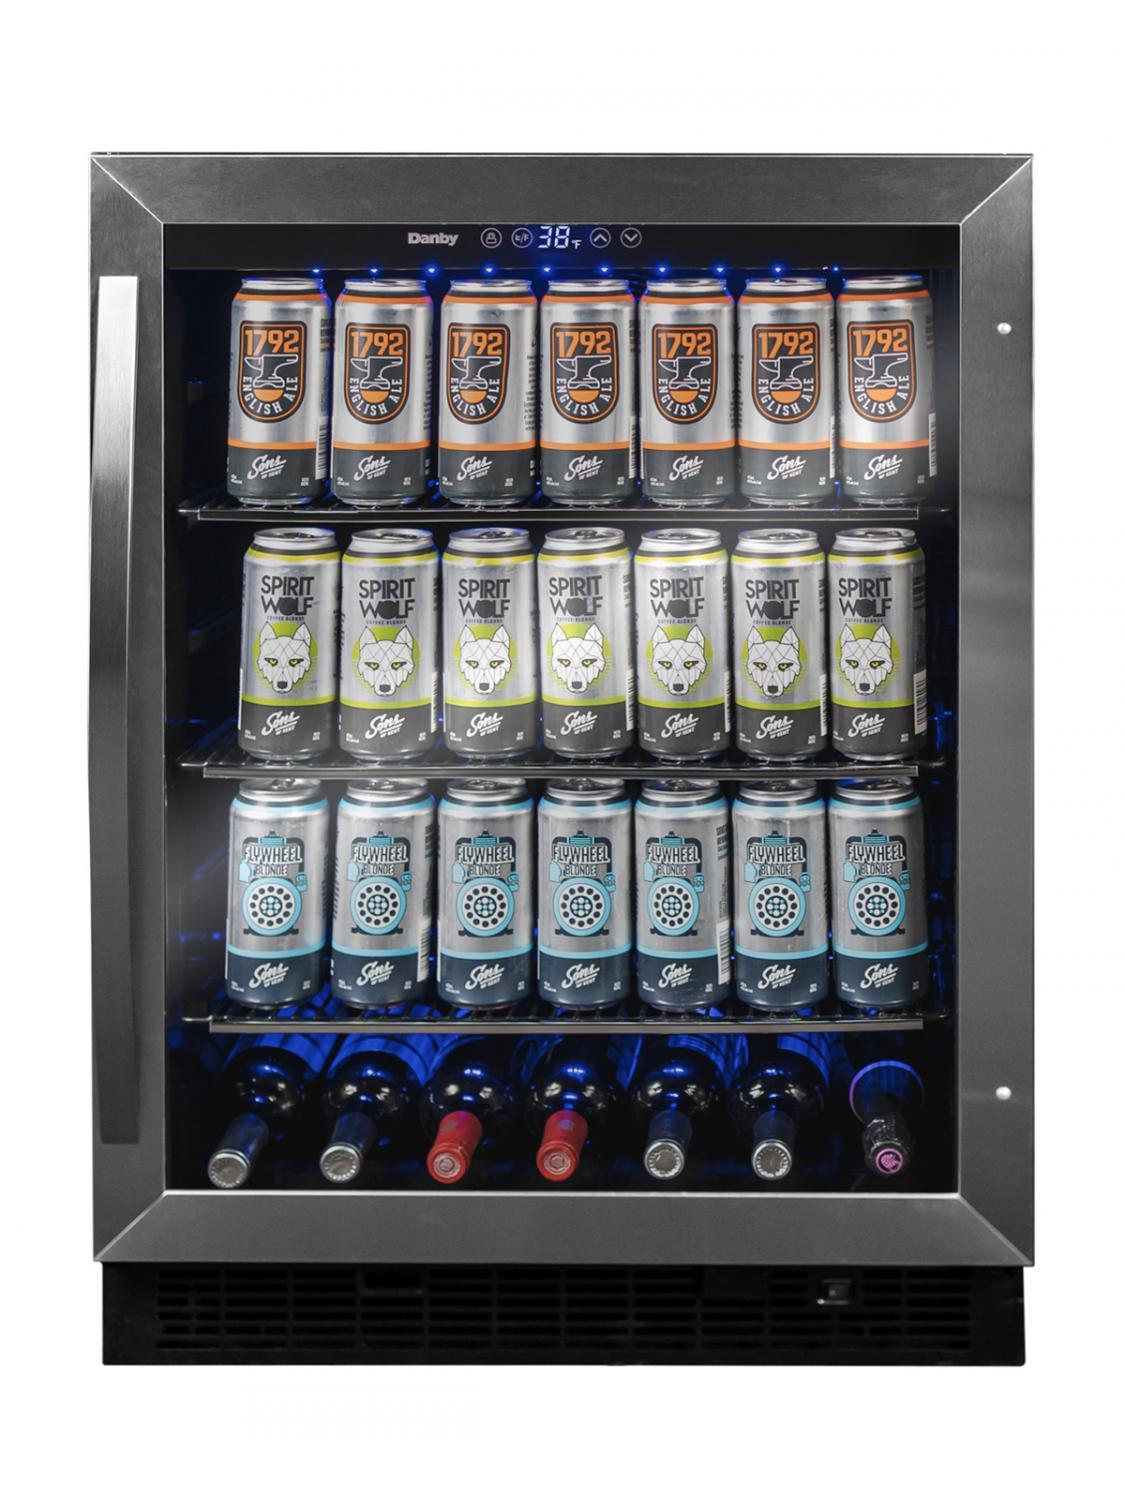 Danby 5.7 cu. ft. Built-in Beverage Center in Stainless Steel